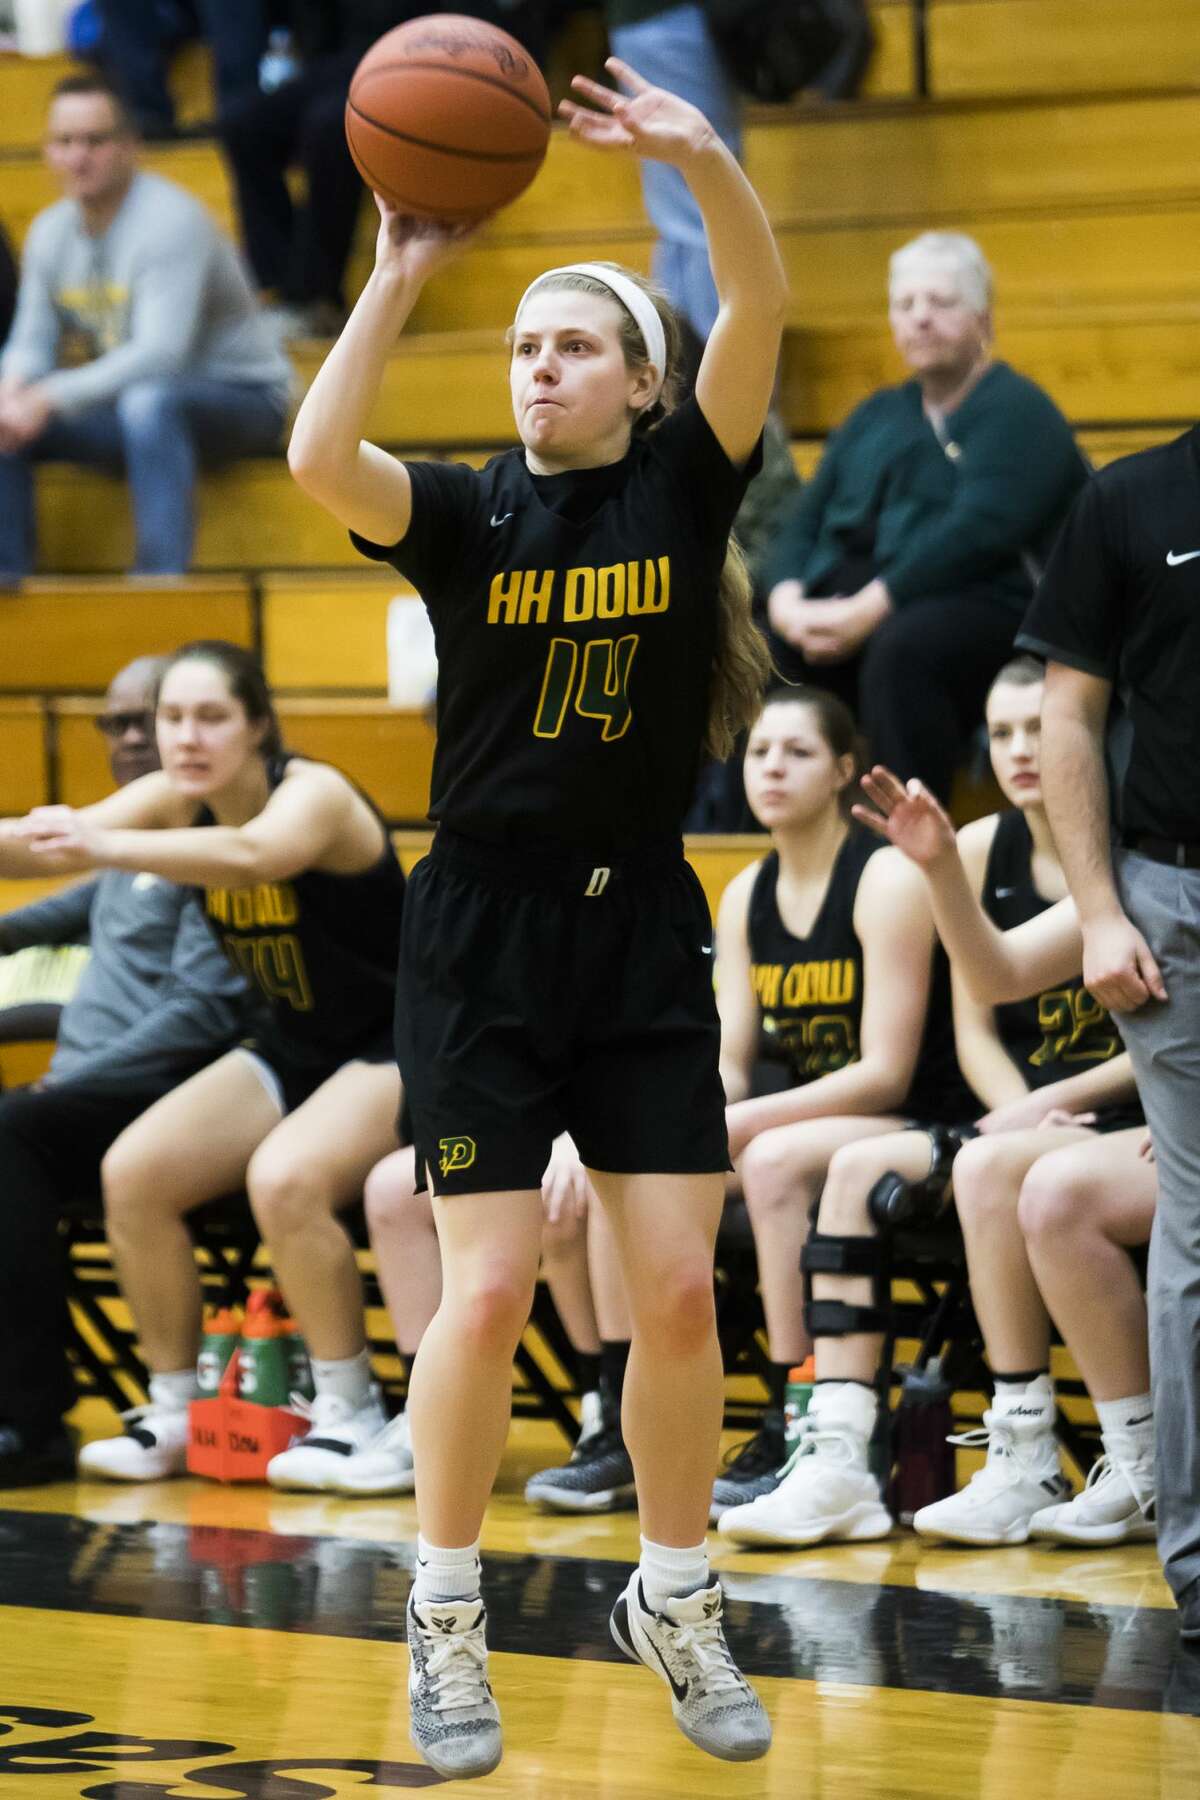 Dow's Molly Davis takes a shot during the Chargers' Division 1 district finals victory over Bay City Western on Friday, March 8, 2019 at Western High School. (Katy Kildee/kkildee@mdn.net)